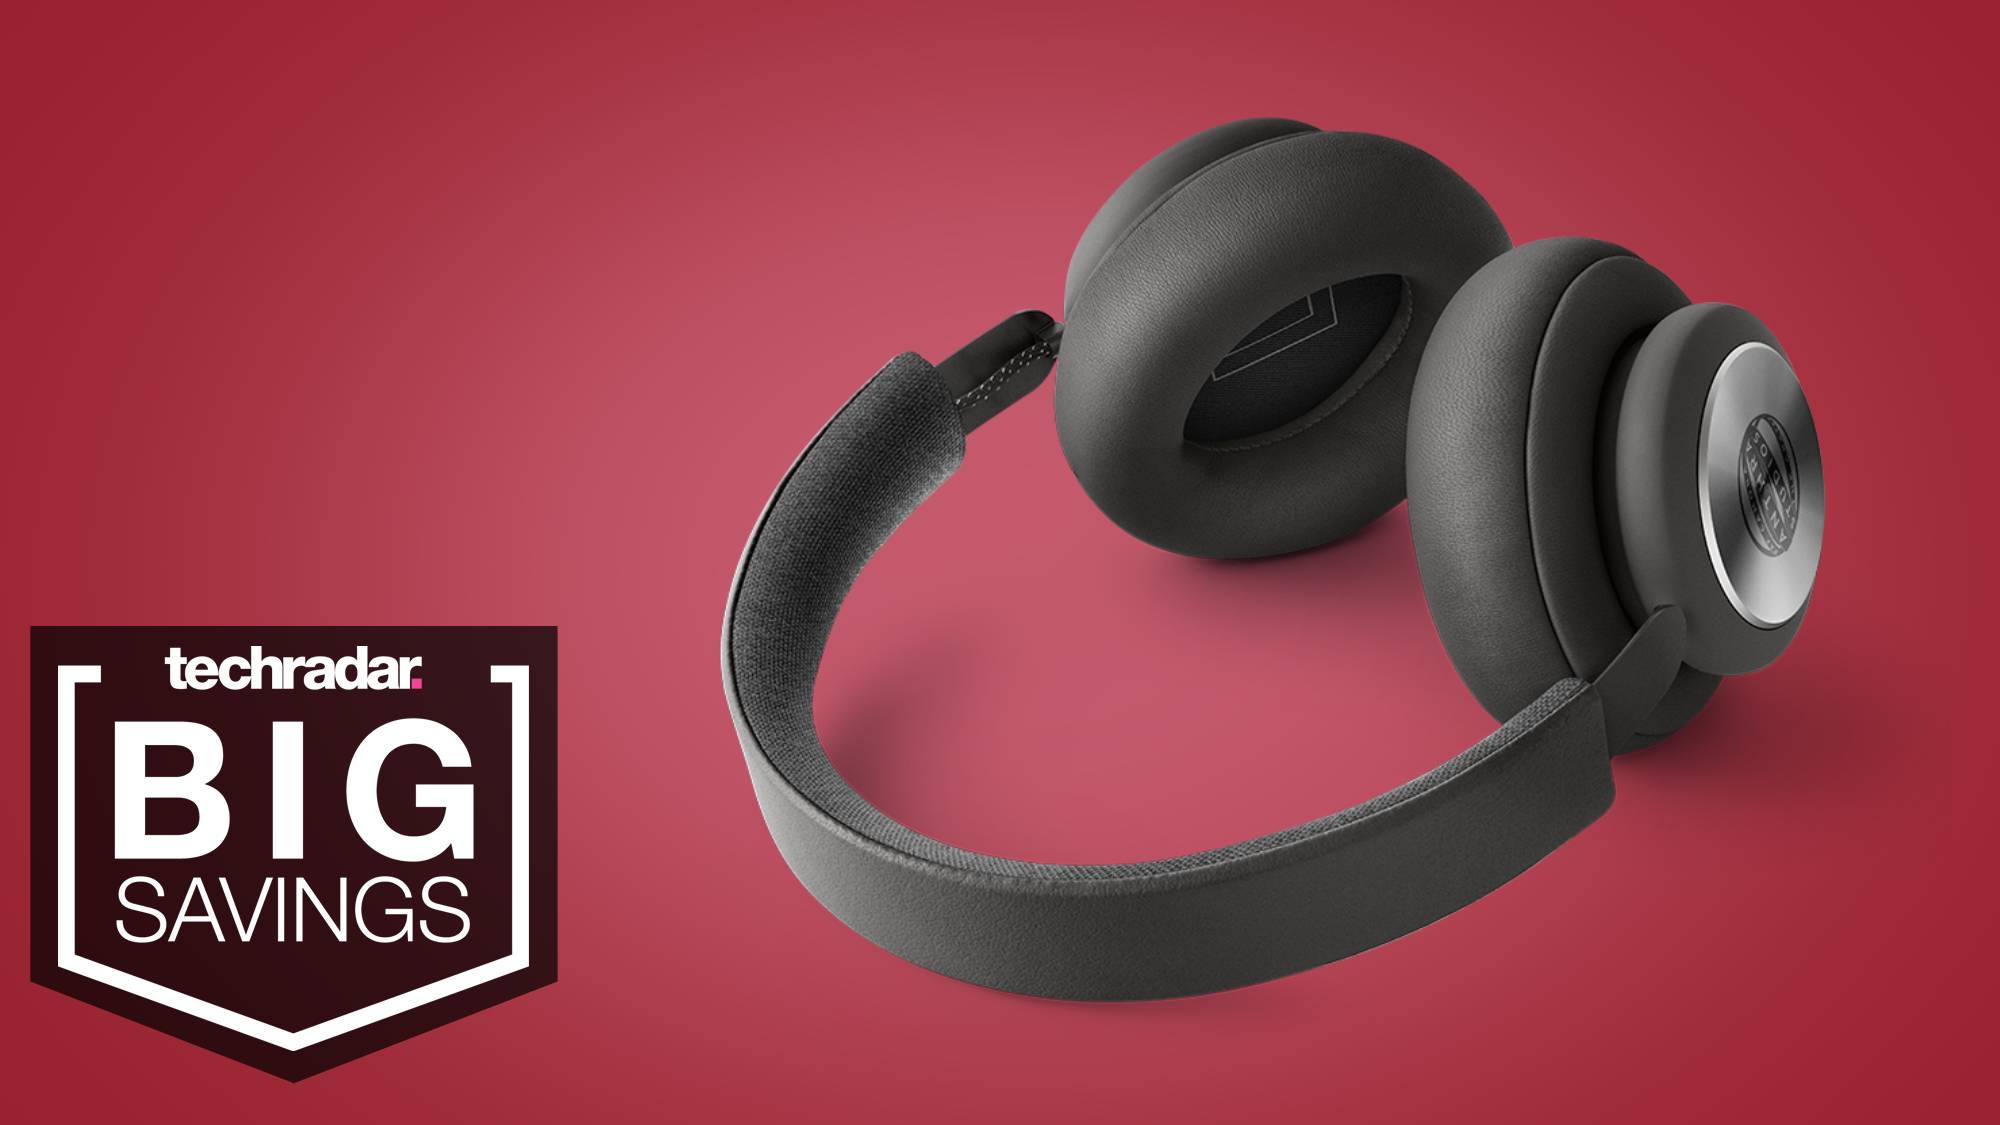 Grab this Bang & Olufsen BeoPlay headphones deal while you